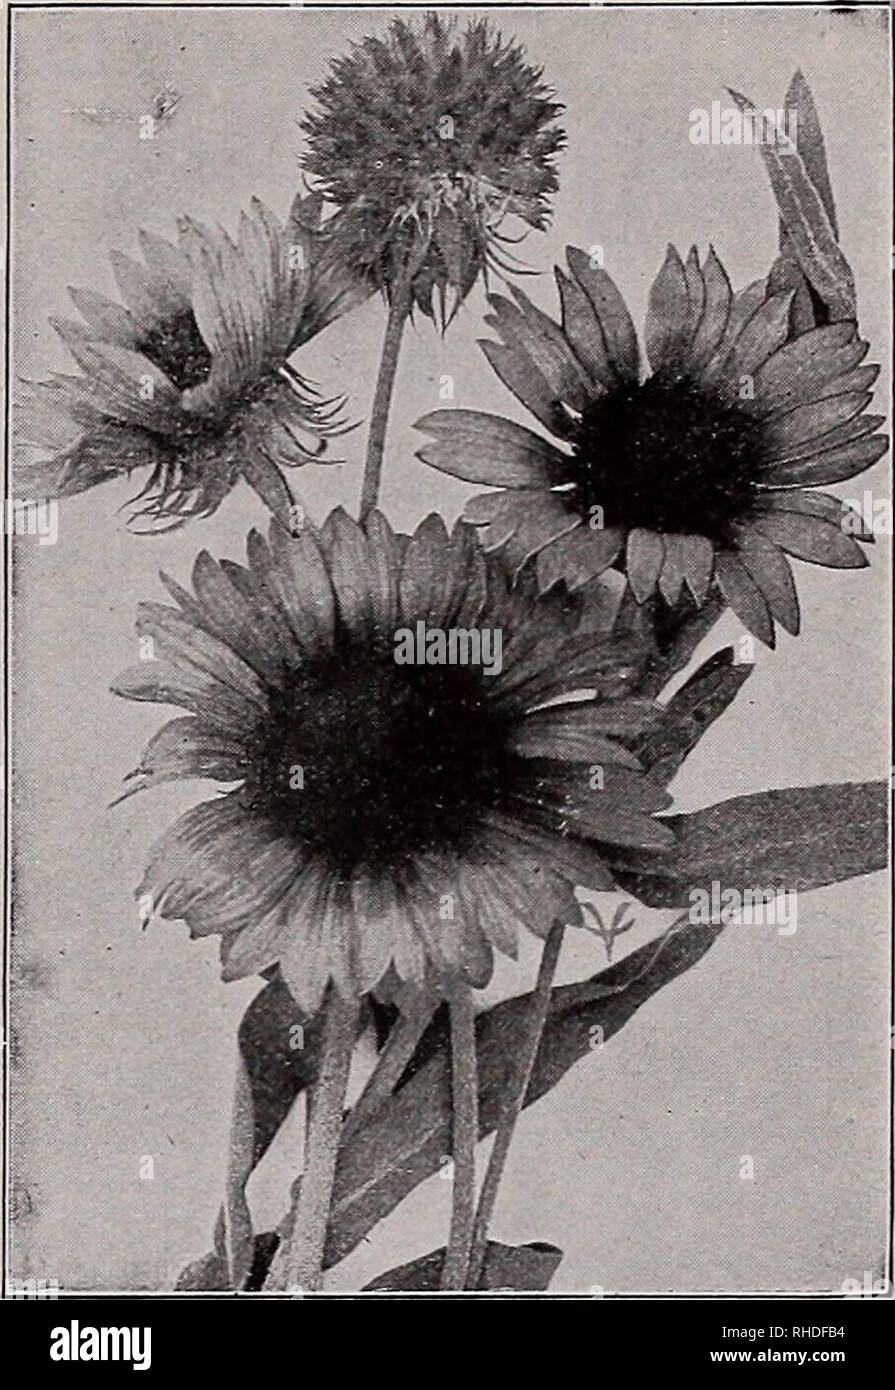 . Book for florists. Flowers Seeds Catalogs; Bulbs (Plants) Seedlings Catalogs; Vegetables Seeds Catalogs; Trees Seeds Catalogs; Horticulture Equipment and supplies Catalogs. SWEET WILLIAM (Dianthus Barbatus) Trade pkt 35c $0.25 3 15 DIANTHUS—Continued Plumarius Double. Fine mixed 34 o: Cyclops. Best single Cyclops. Red Hybrids 35 Cyclops. Double Mixed 3^oz.,$1.00 .50 Semperflorens. Single Mixed 20 Double and Single Mixed H oz., 40c .25 Diadematus. Rose sprinkled white Albus Plenus. Double white oz., 75c Nanus fl. pi. Double Eariv-Flowering. Mixed &quot; Hoz., 70c Mrs. Sinkins Double white 50  Stock Photo